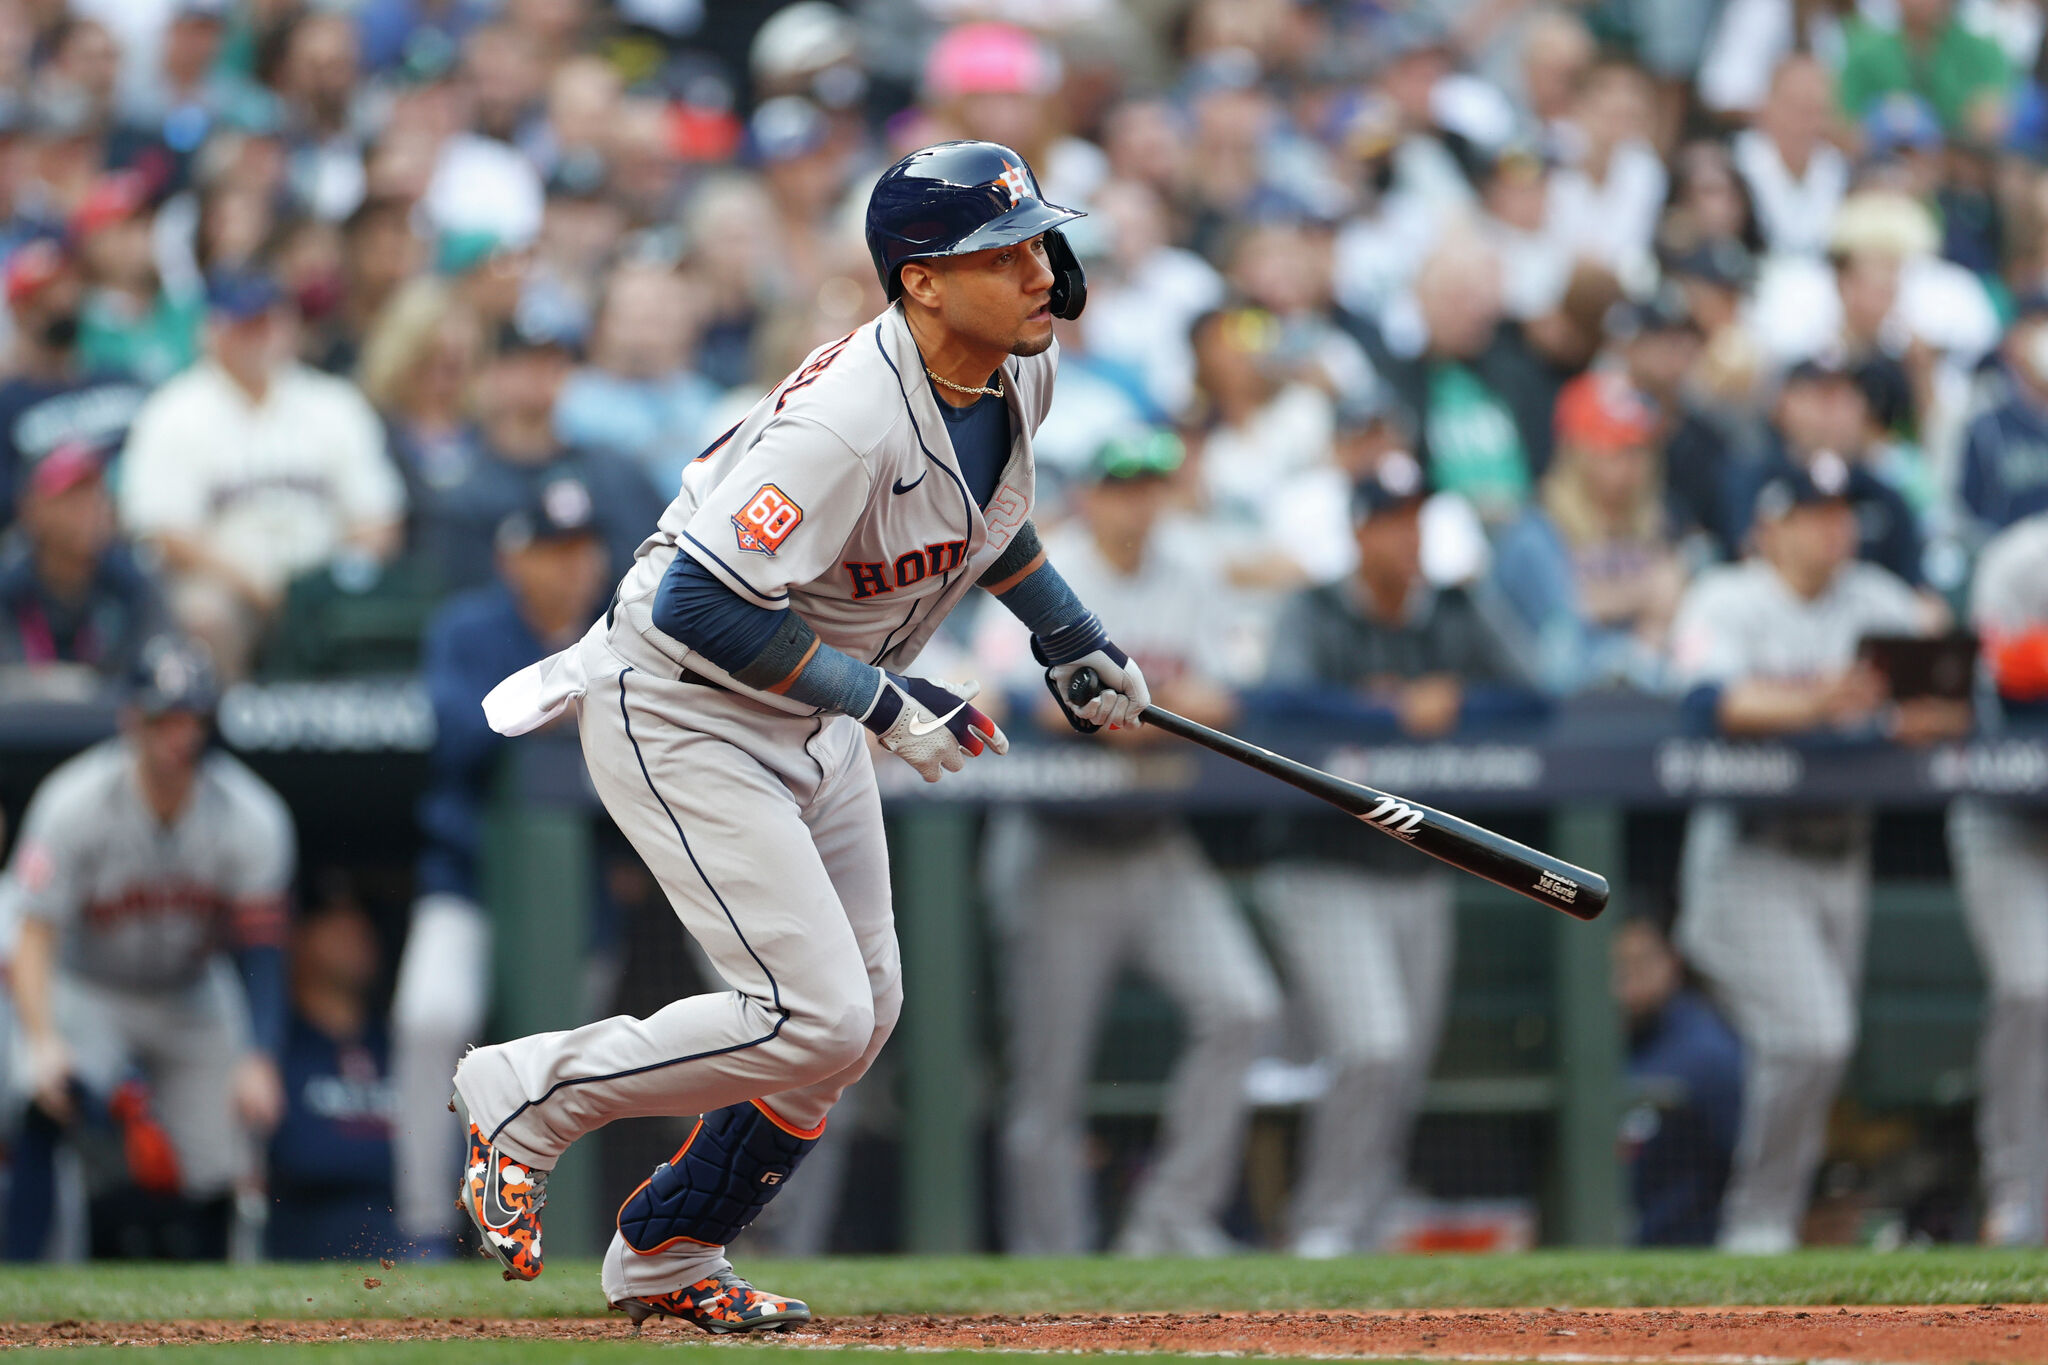 Mariners vs. Astros schedule: Complete dates, times, TV channels for 2022  ALDS games